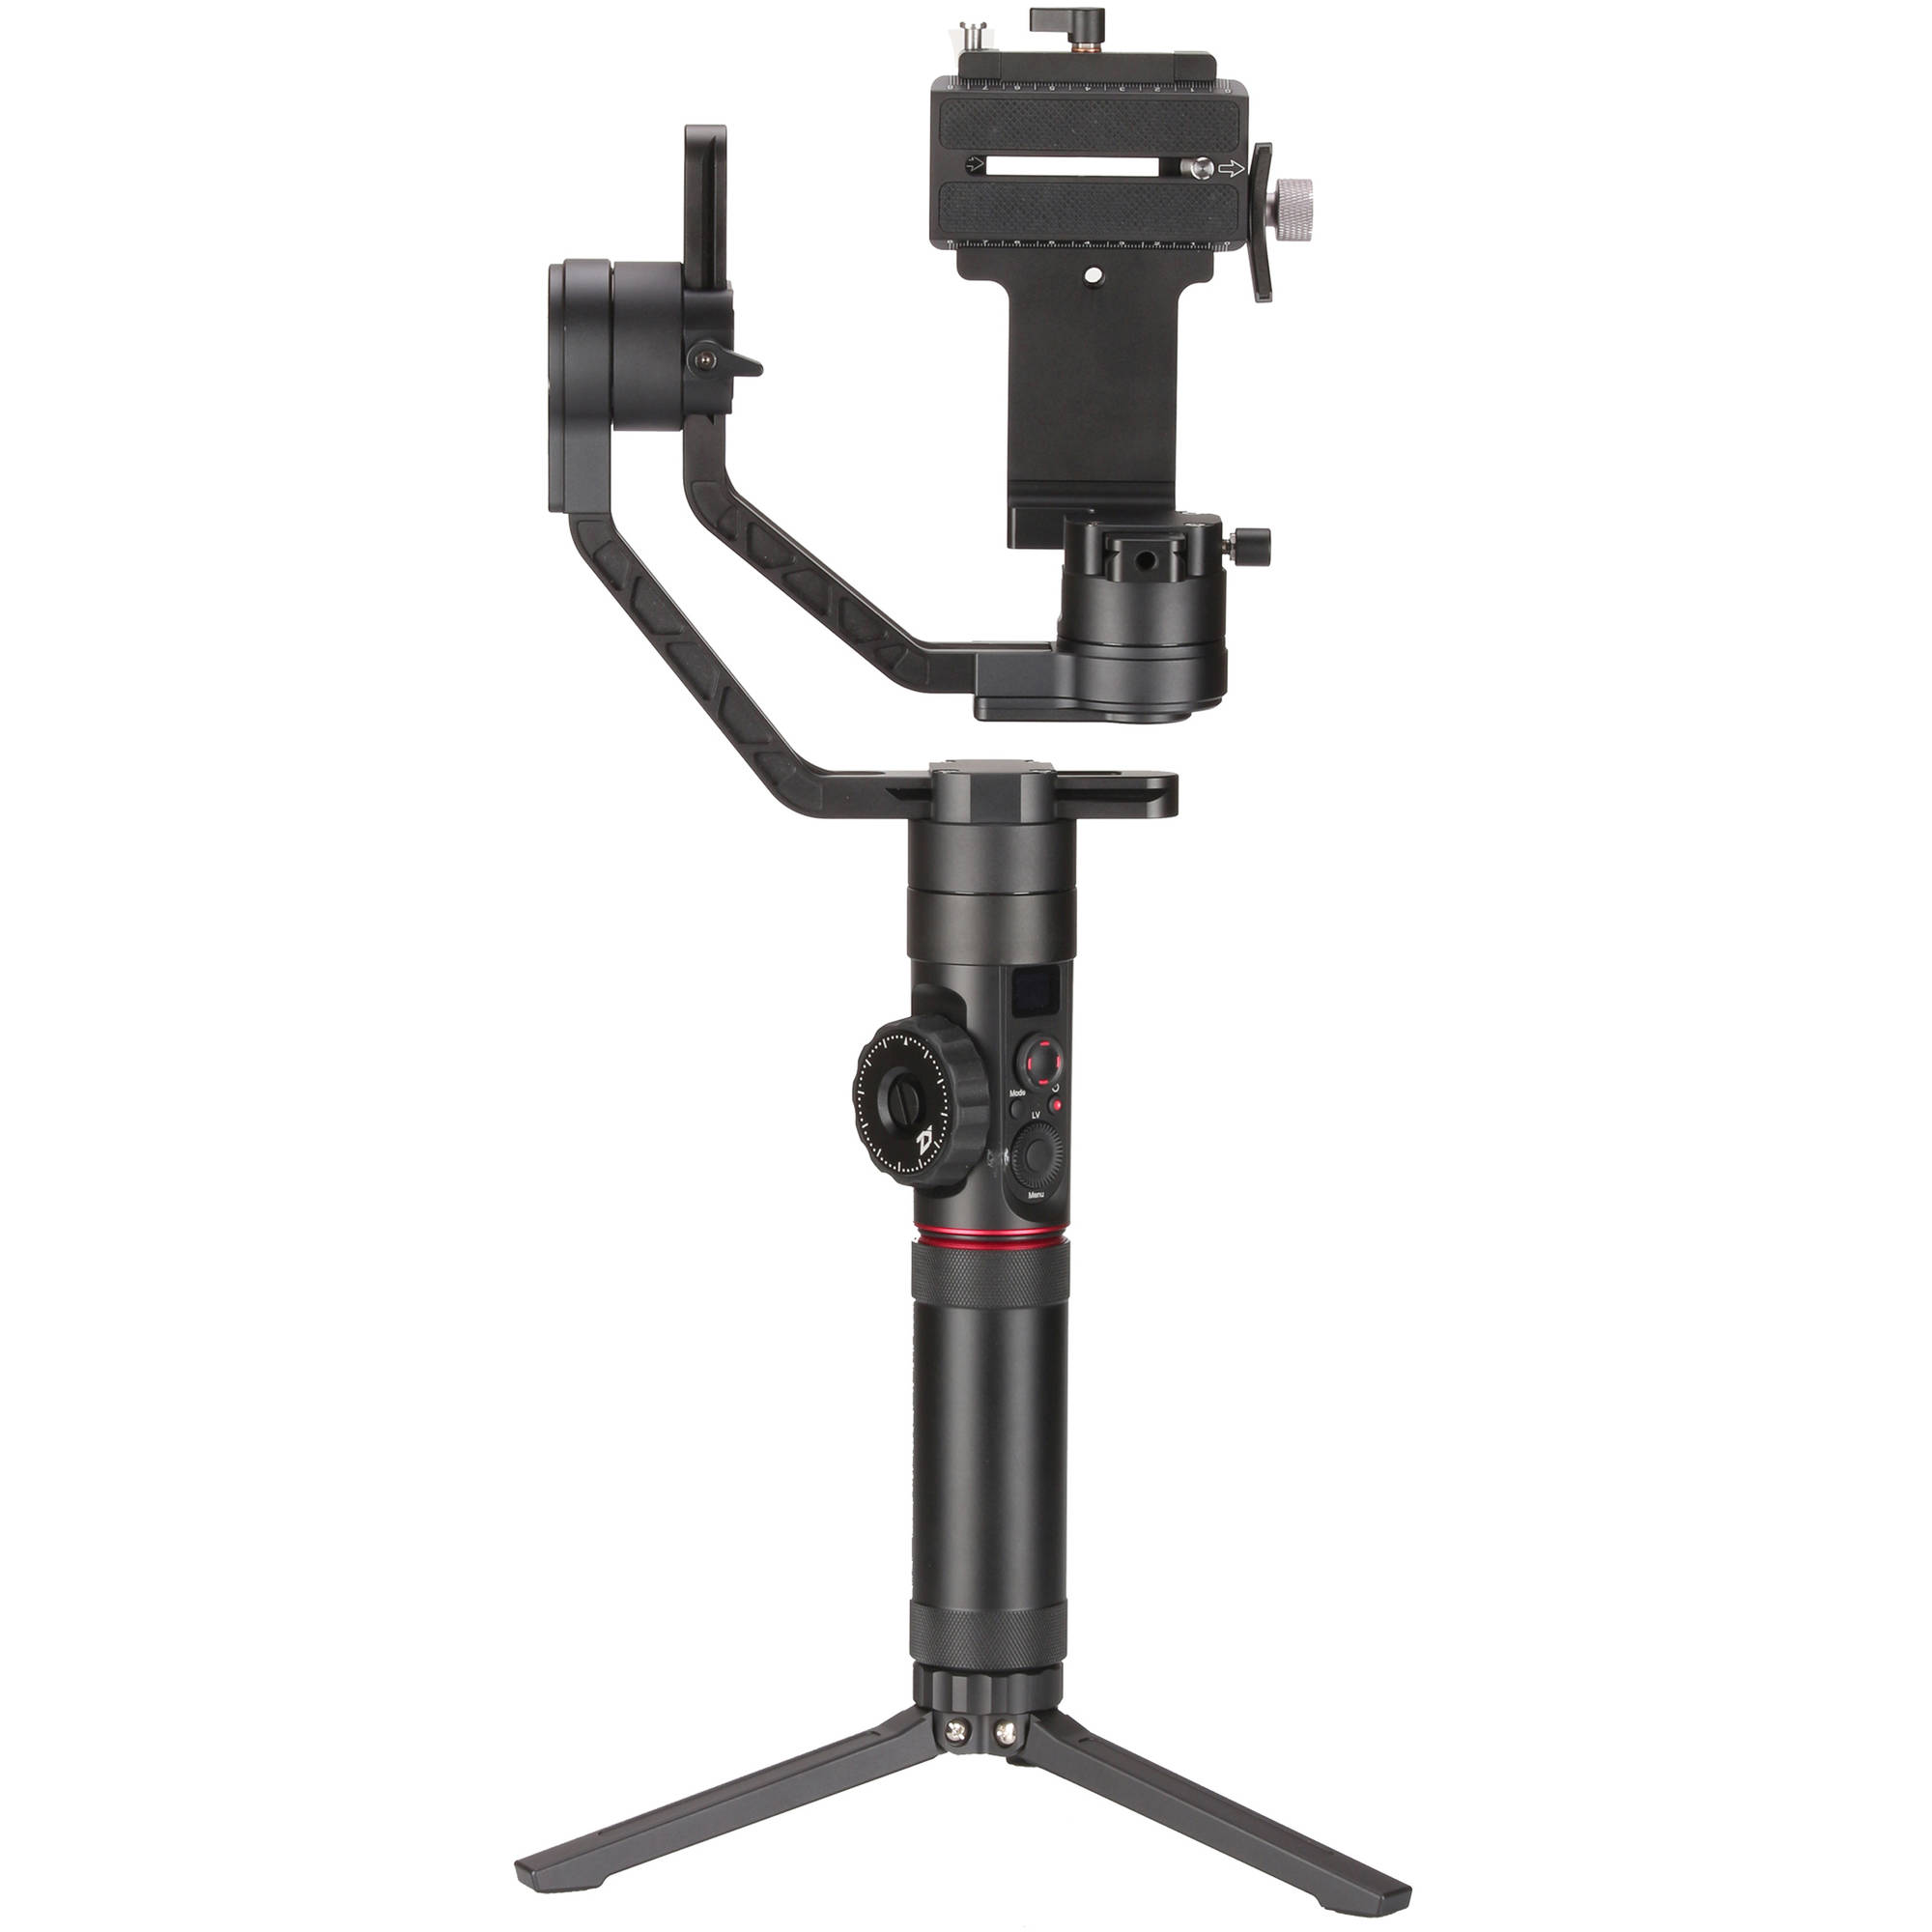 Zhiyun Crane 2 3 Axis Gimbal Stabilizer with Follow Focus for DS